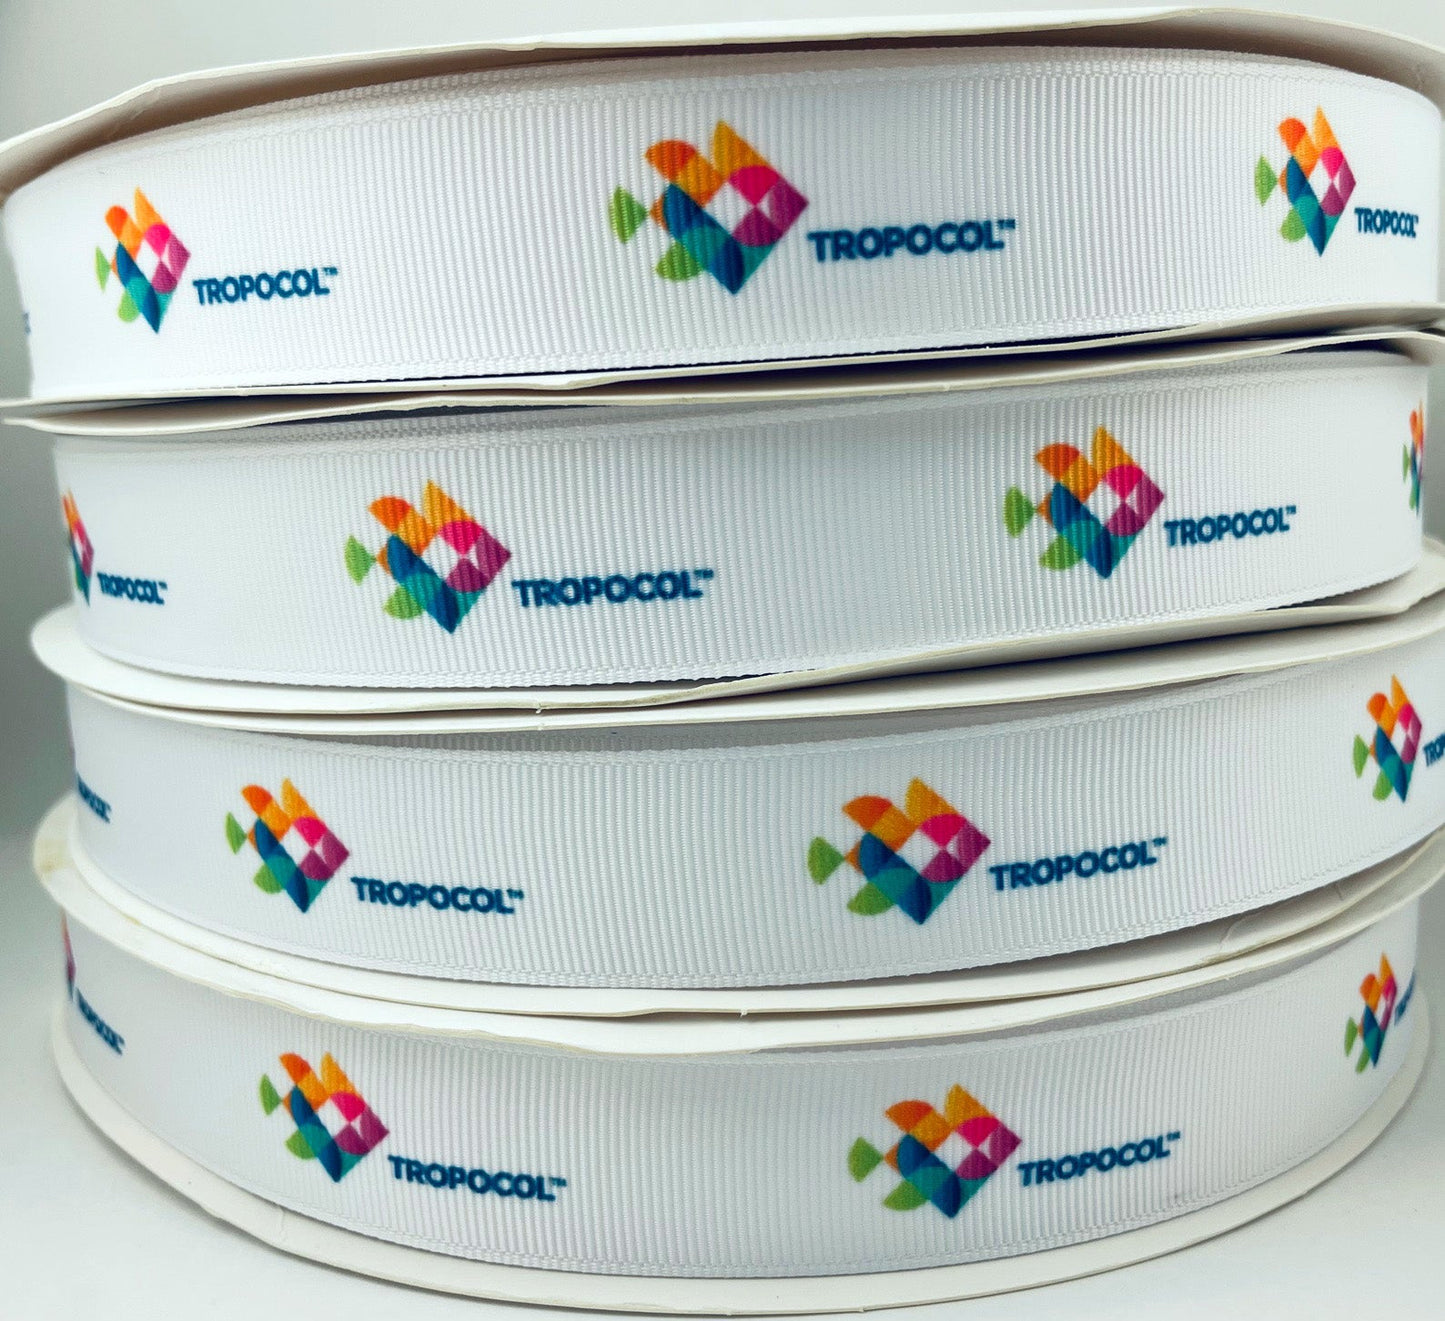 1 1/2" Sublimated Grosgrain Printed Ribbon By The Roll